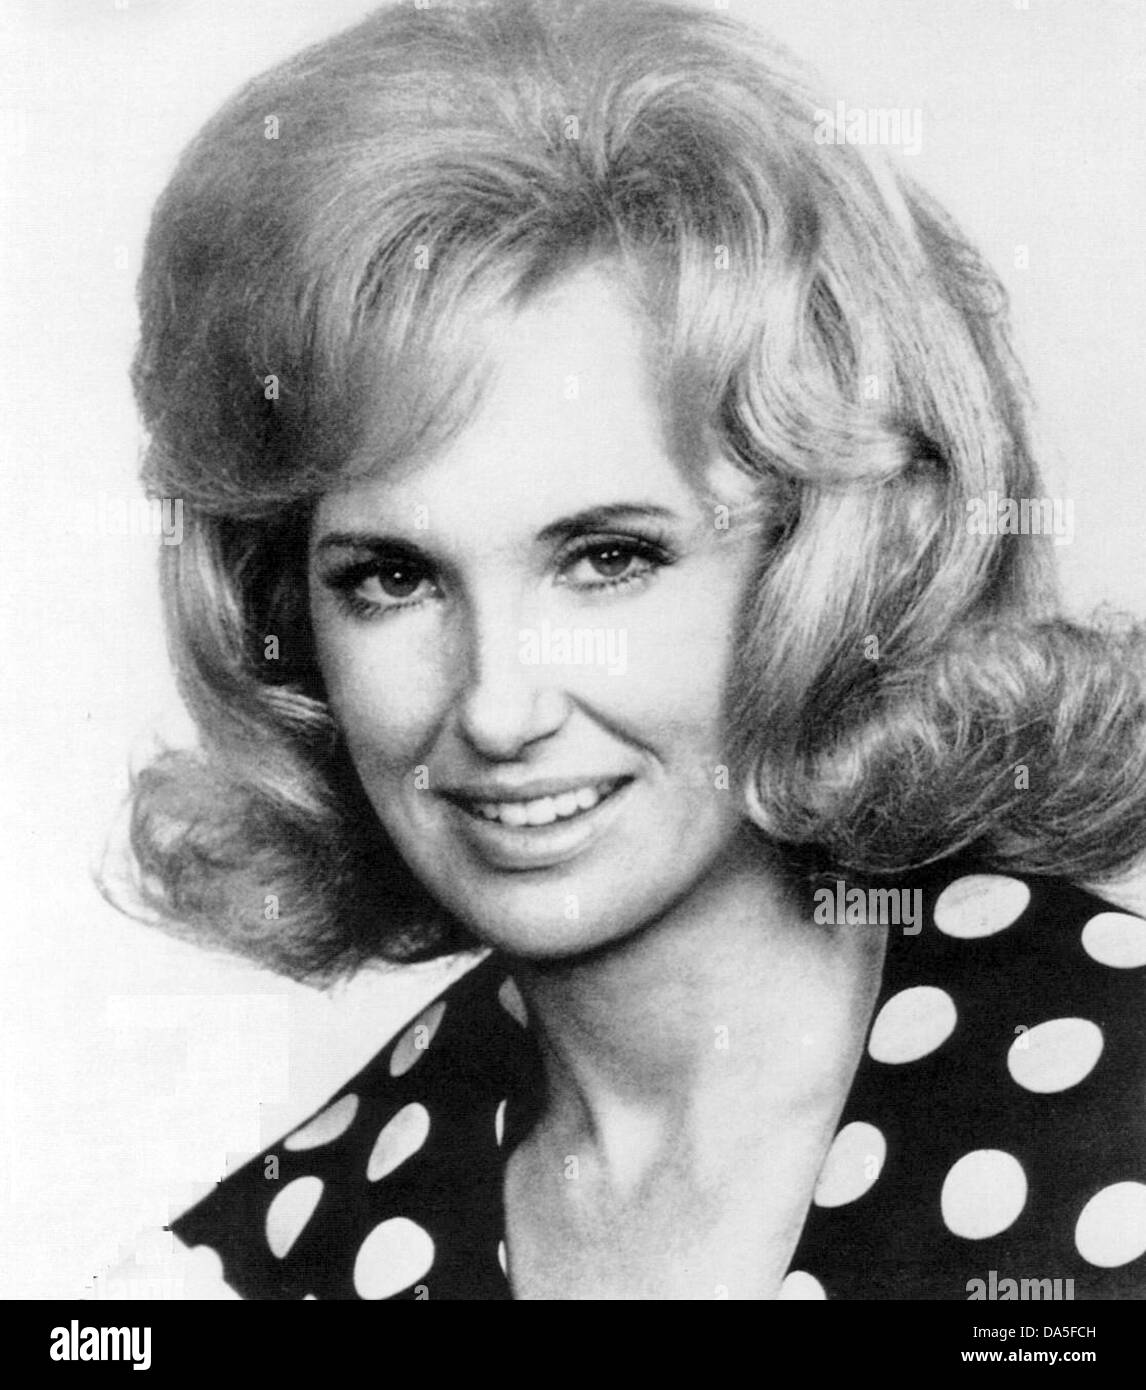 TAMMY WYNETTE (1942-1998) Promotional photo of US Country singer in 1968 Stock Photo